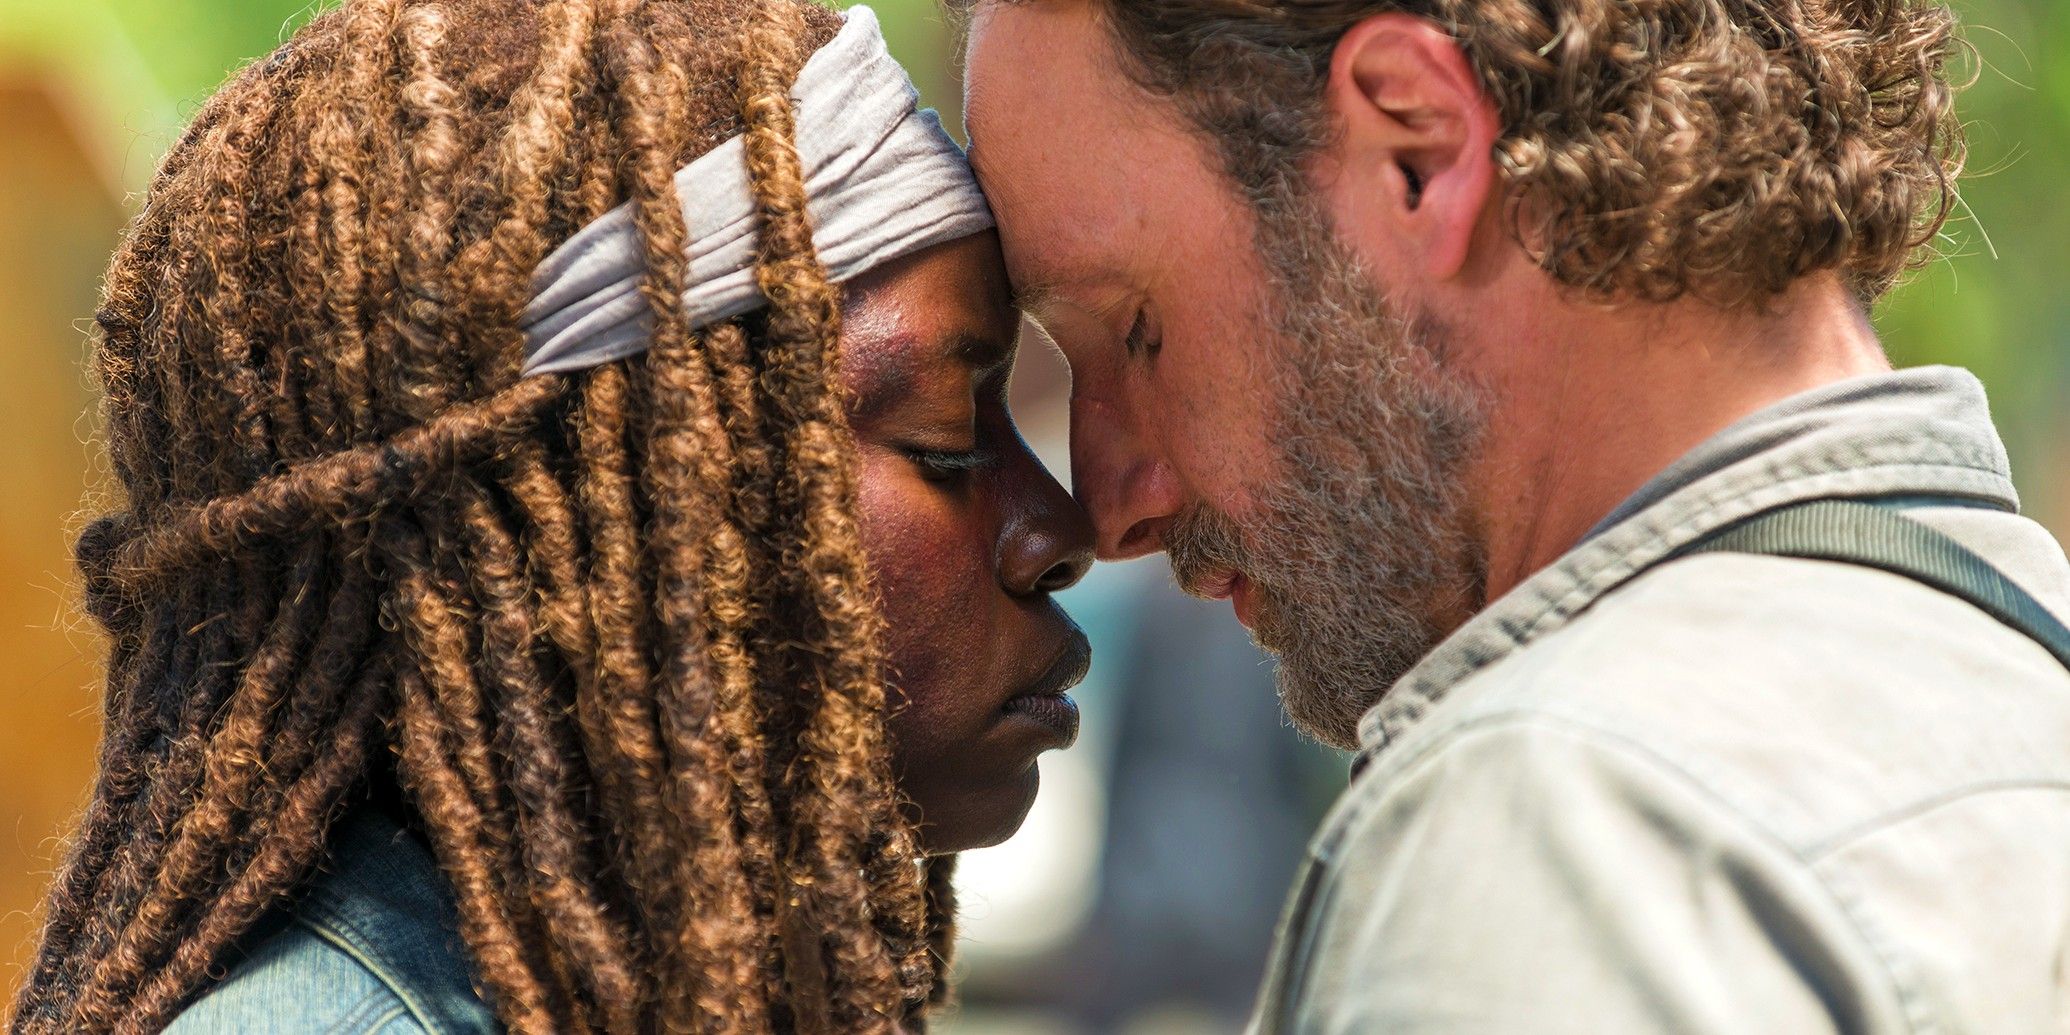 Rick and Michonne about to kiss in The Walking Dead